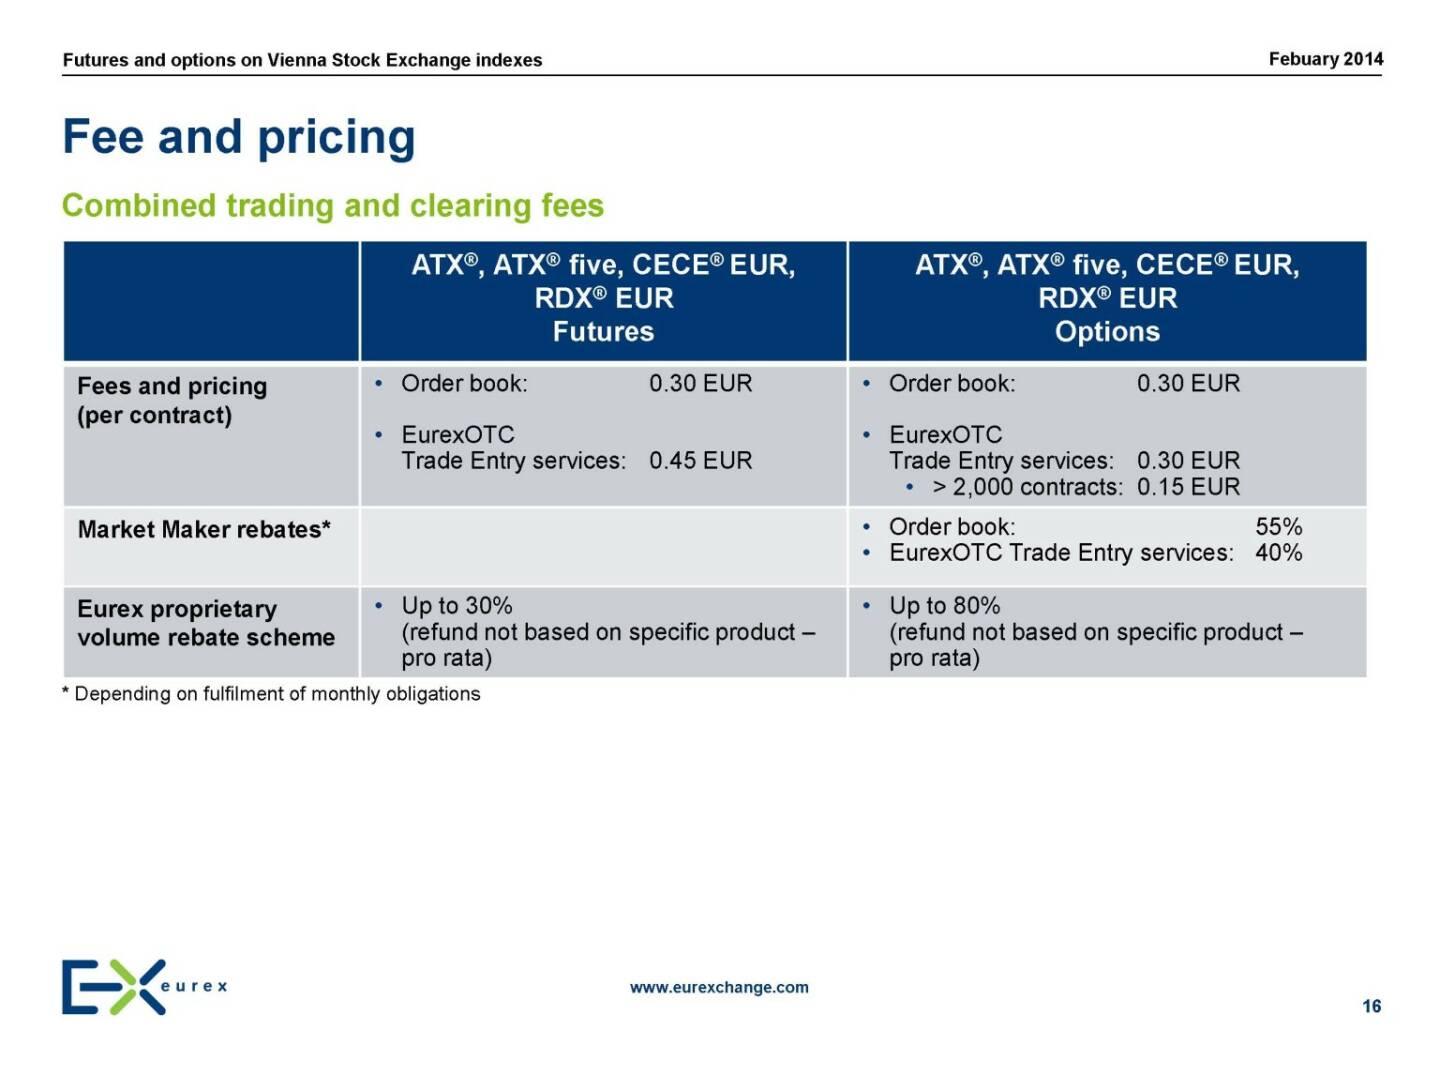 Fee and pricing